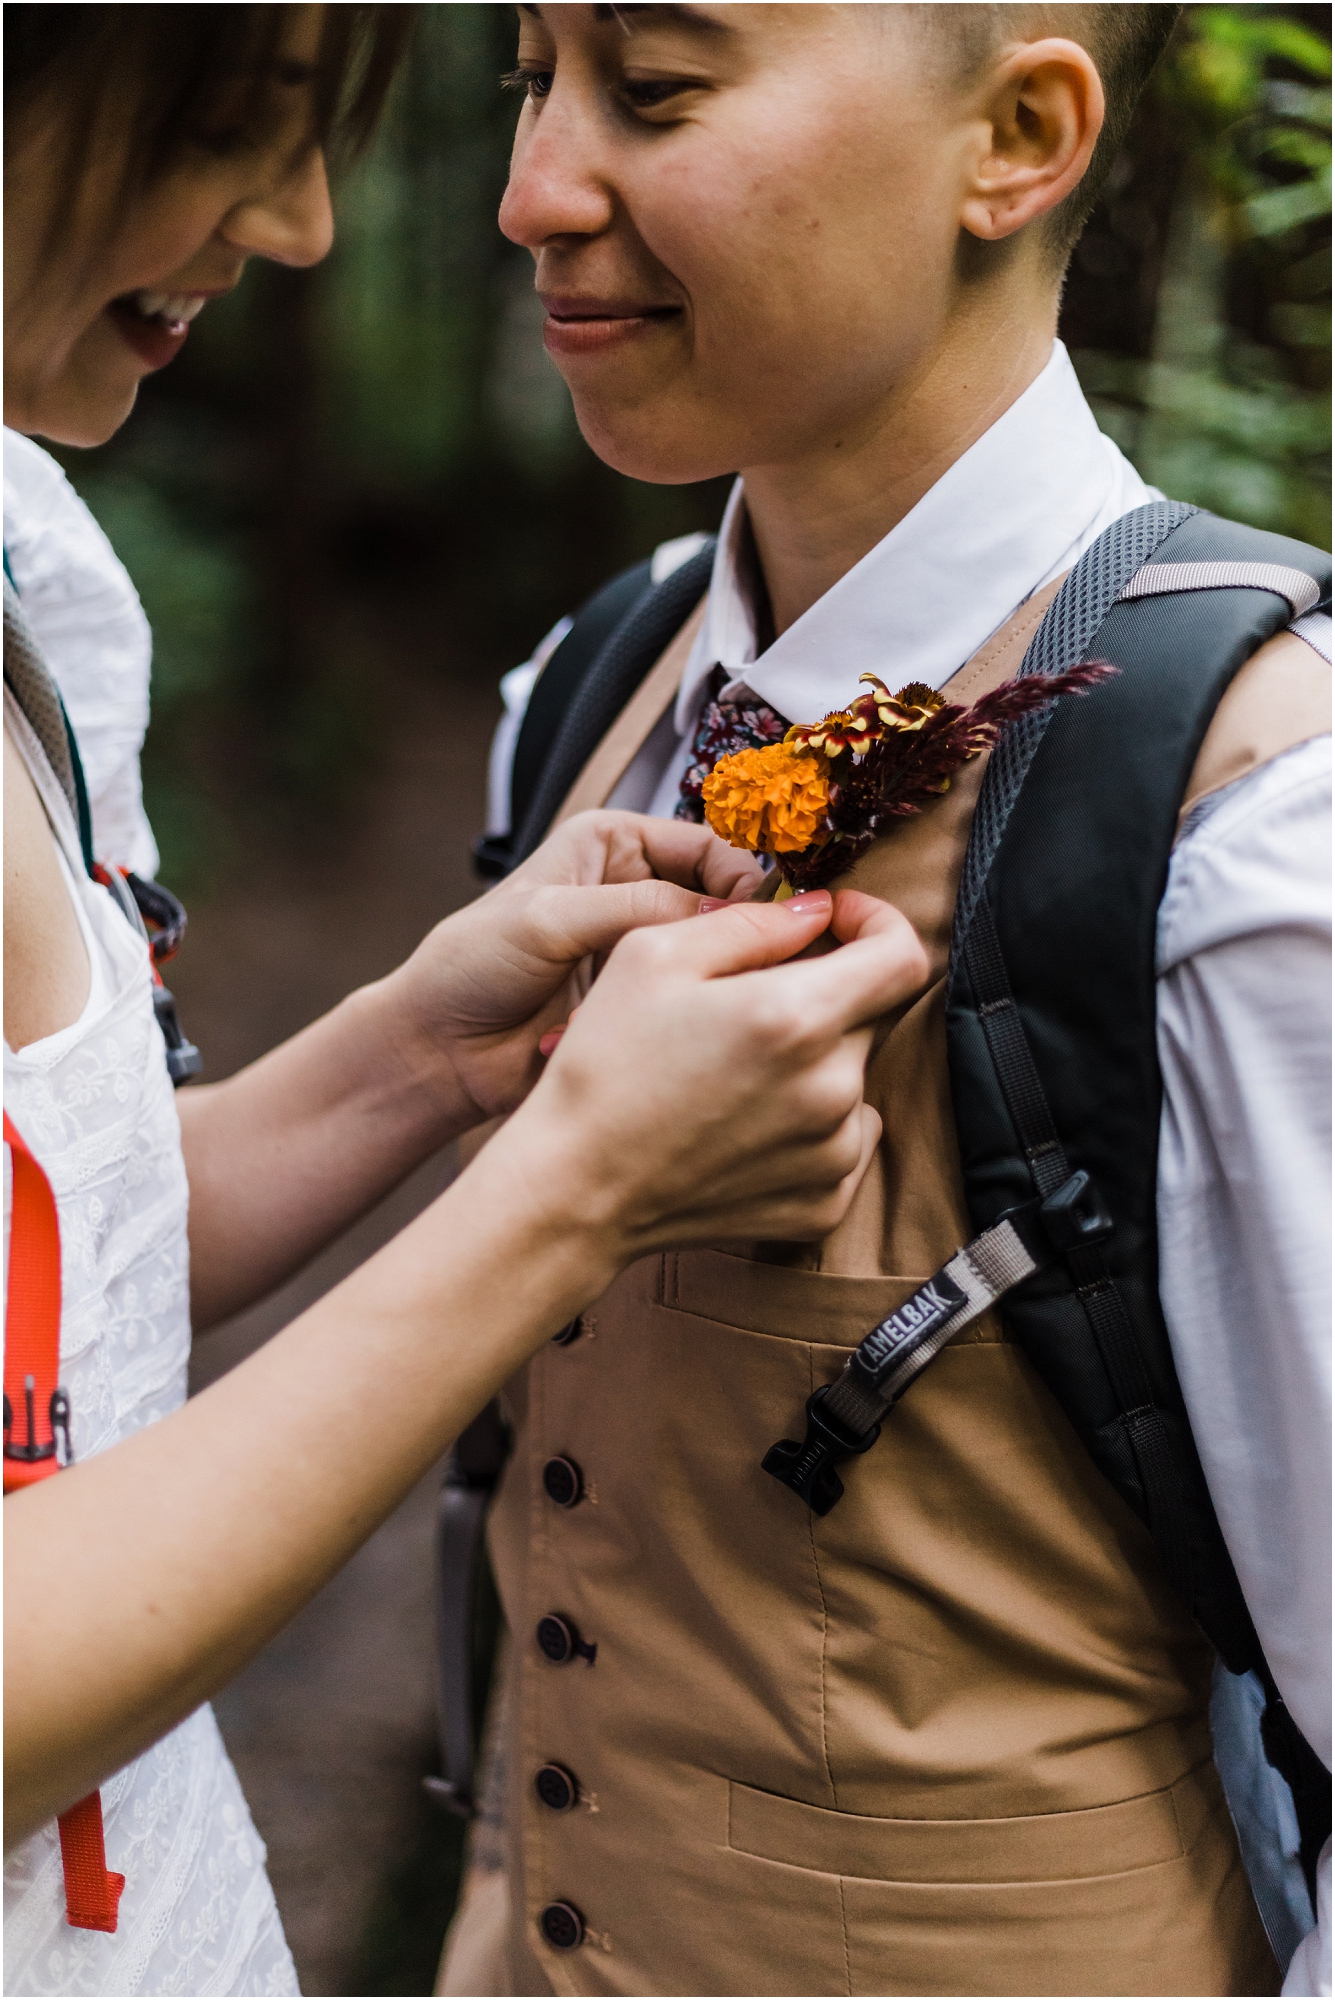 Pinning the orange marigold boutonnière on the vest of the groom before his PNW hiking adventure elopement. | Erica Swantek Photography 